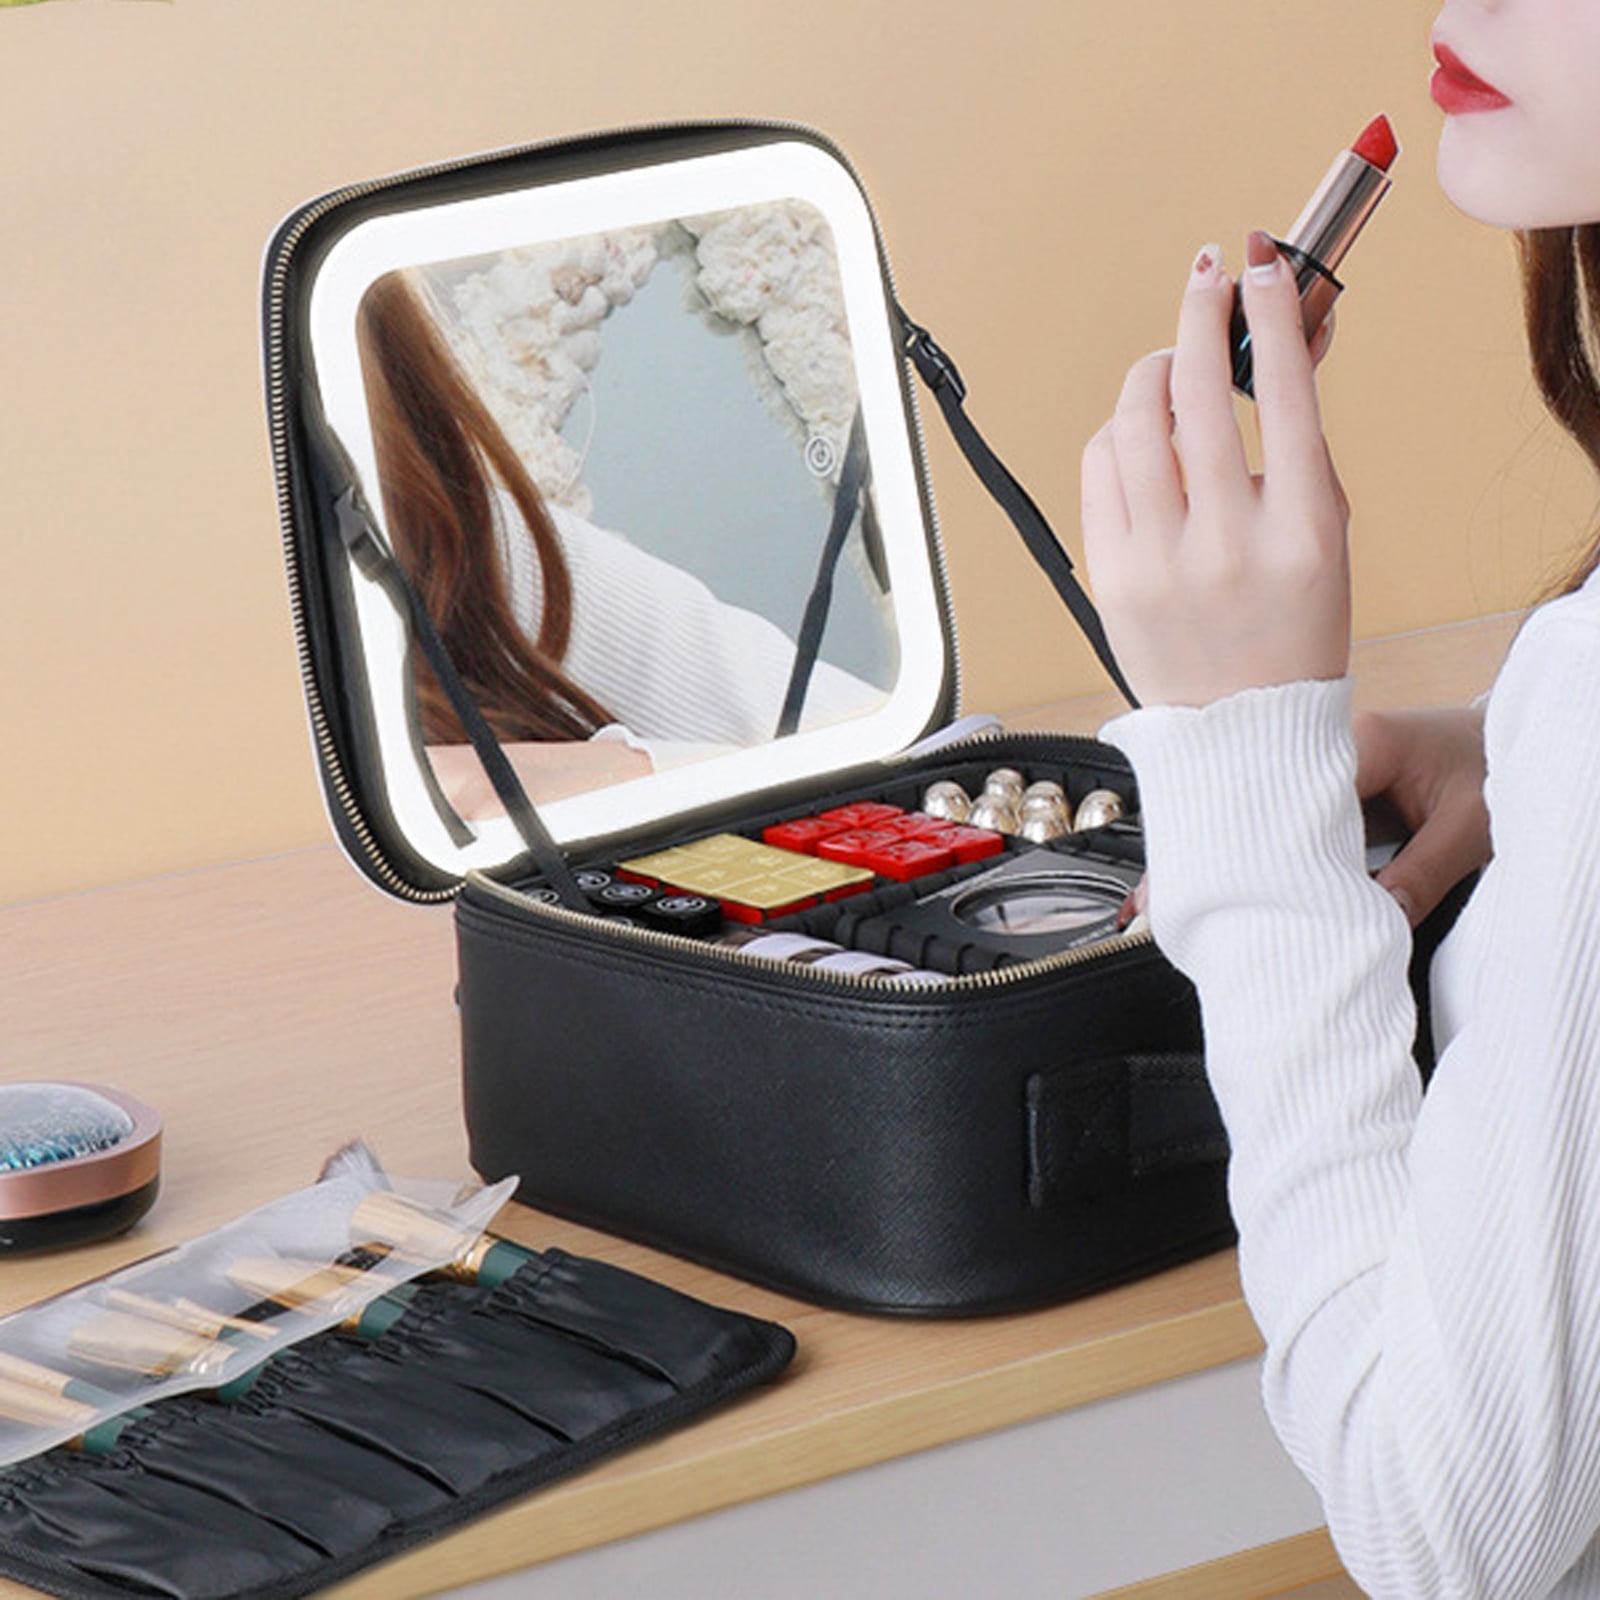 Makeup Bag with Mirror of LED Lighted, Makeup Train Case with Adjustable  Dividers, Makeup Case with Mirror